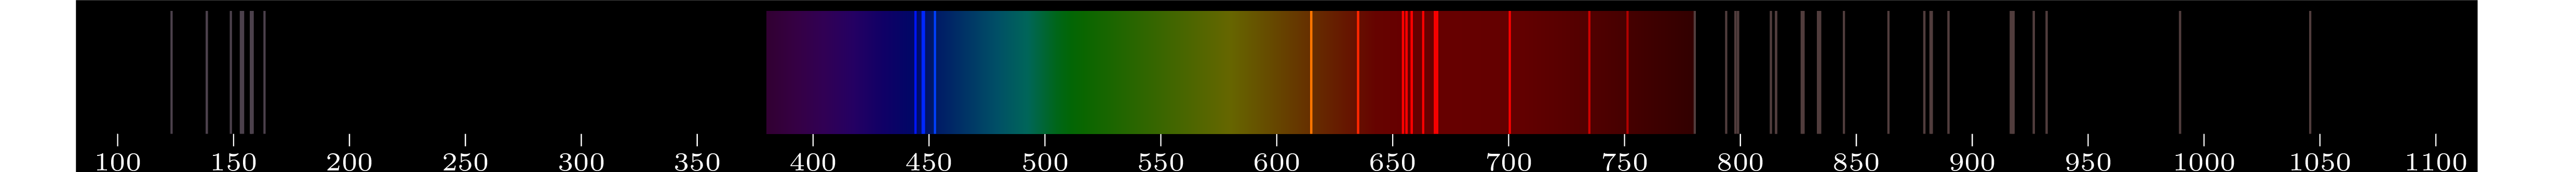 emmision spectra of element Br